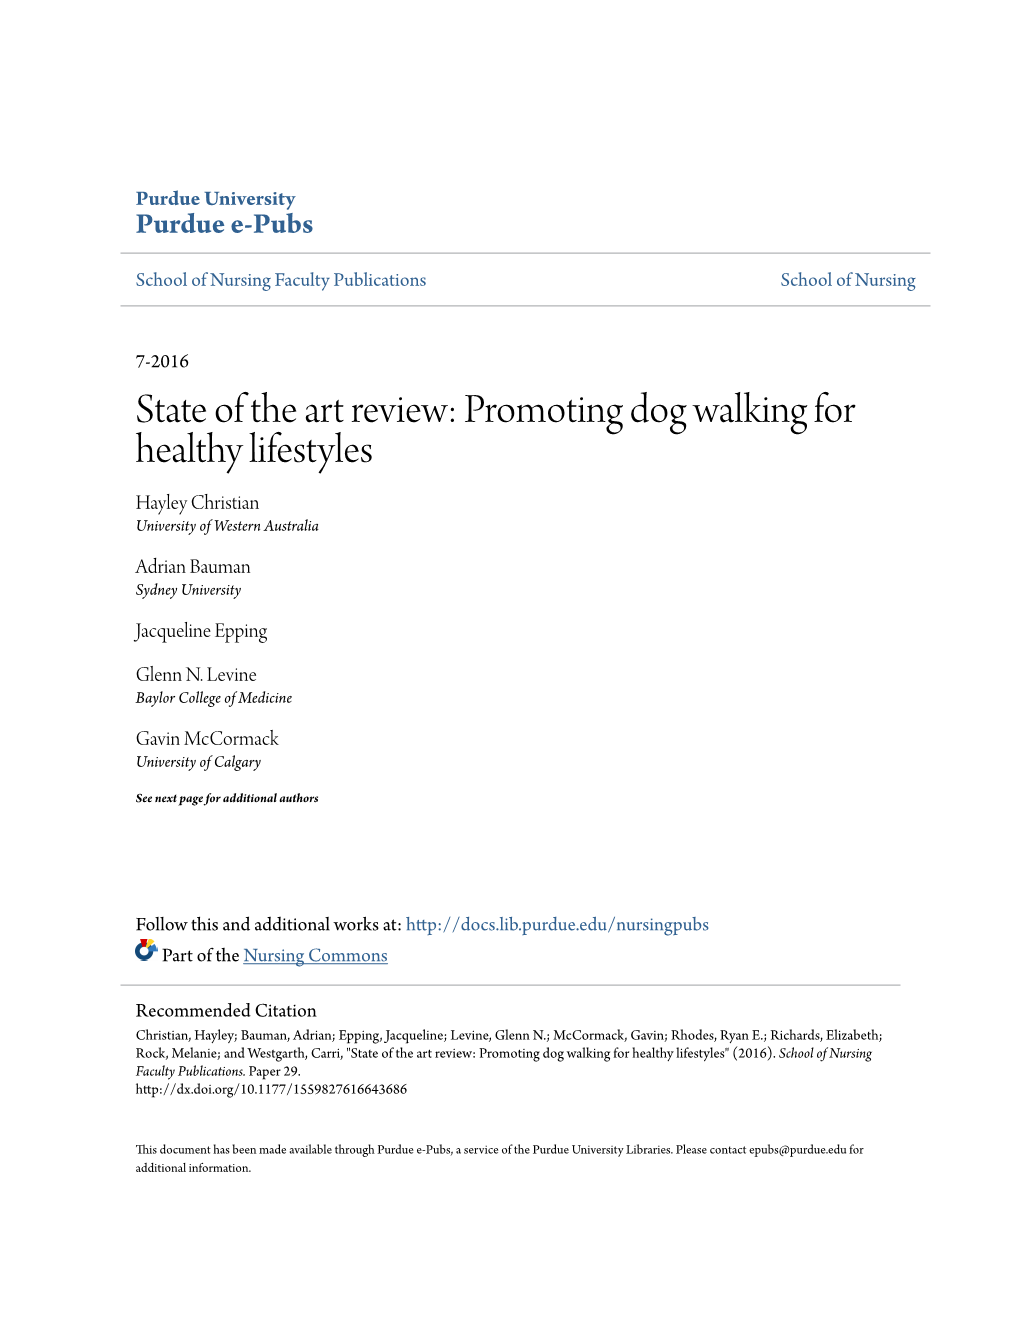 State of the Art Review: Promoting Dog Walking for Healthy Lifestyles Hayley Christian University of Western Australia